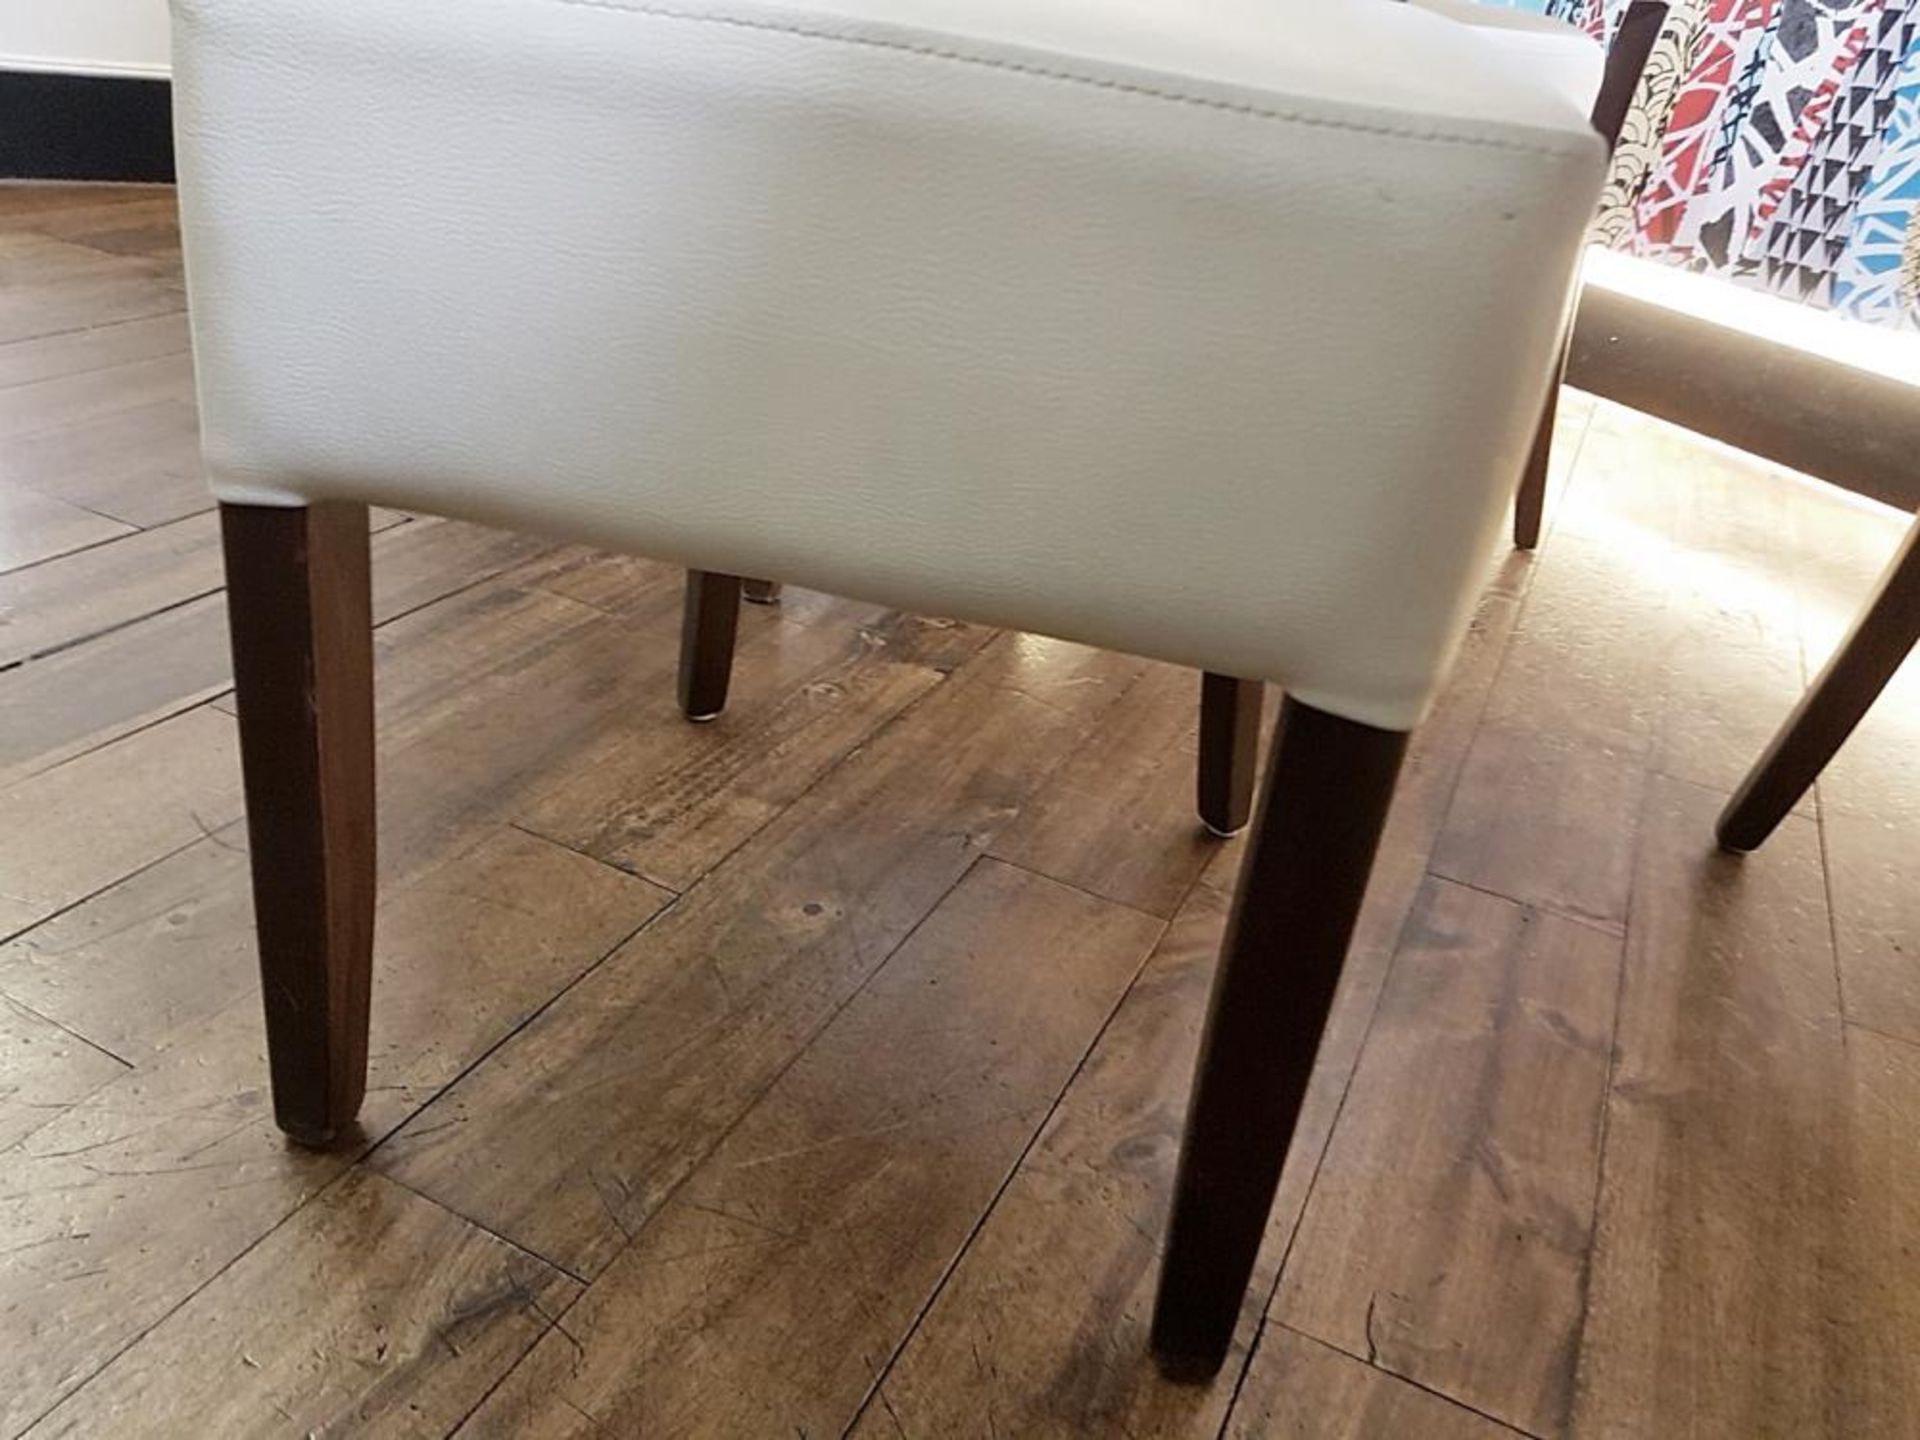 20 x Cream Faux Leather Chairs From Restaurant - Ref: KR20 - CL345 - Location: Altrincham - Image 3 of 5